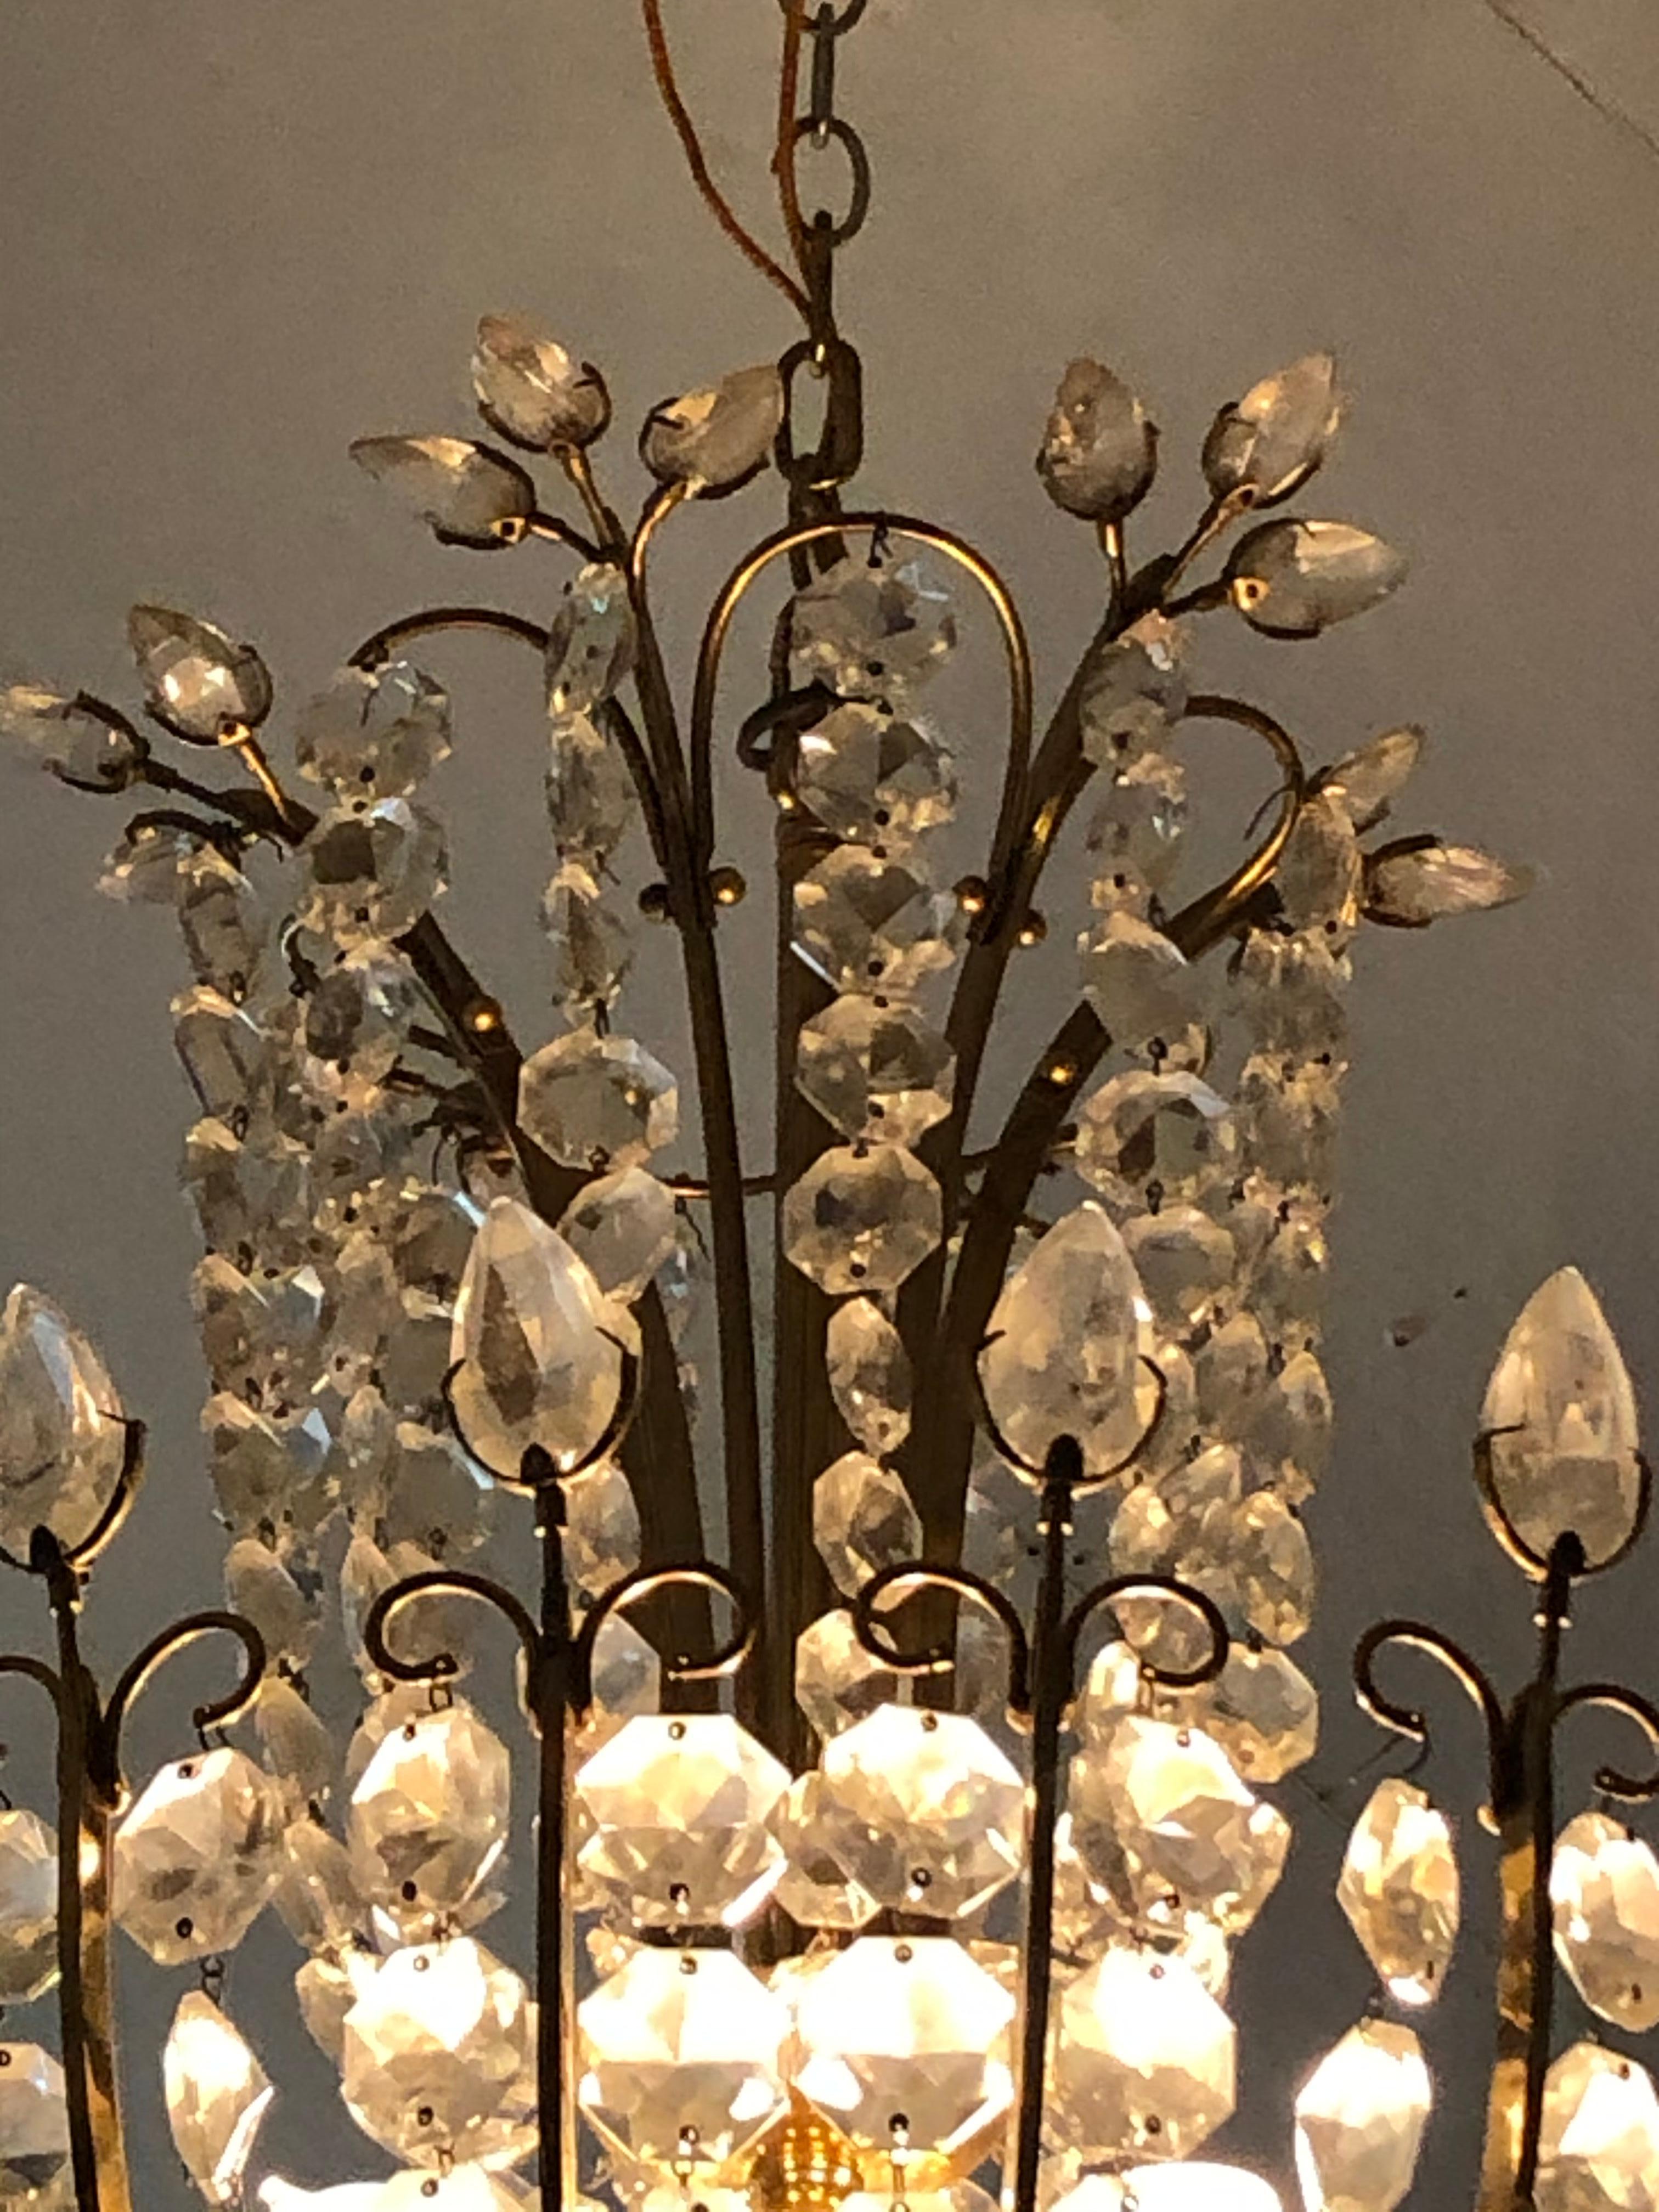 A wonderfully shaped glamorous Italian chandelier having special details such as leaf shaped crystals adorning the top, a rounded crystal cage at the bottom with tiny accent light, and 8 interior bulbs so lots of light available. A added flourish is